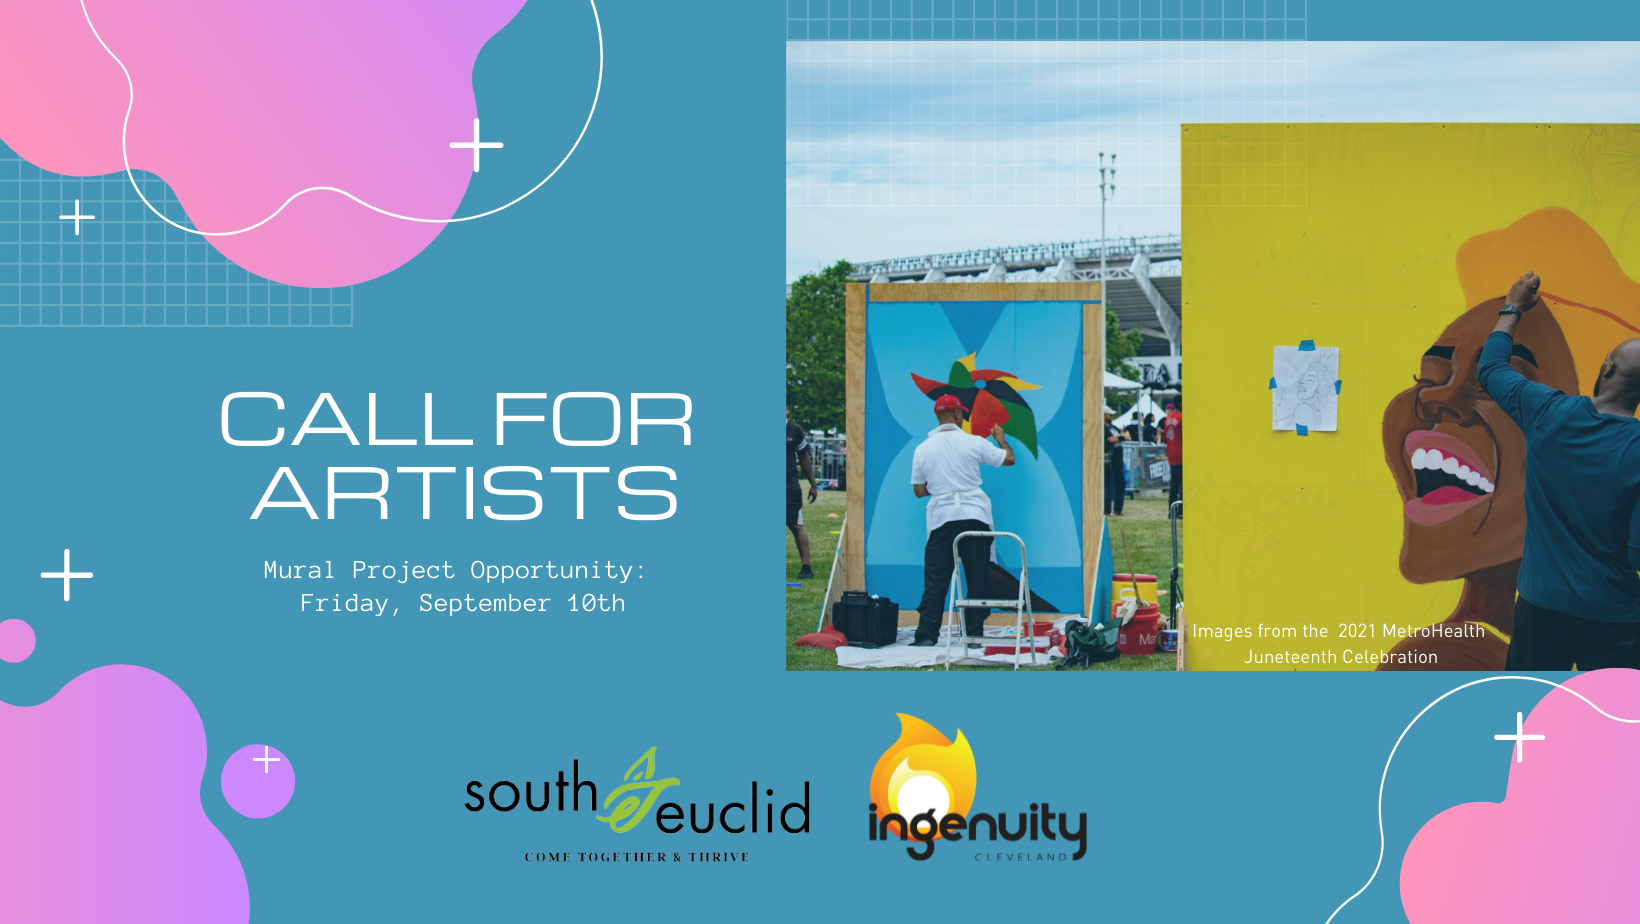 ING and City of South Euclid Call for Artists